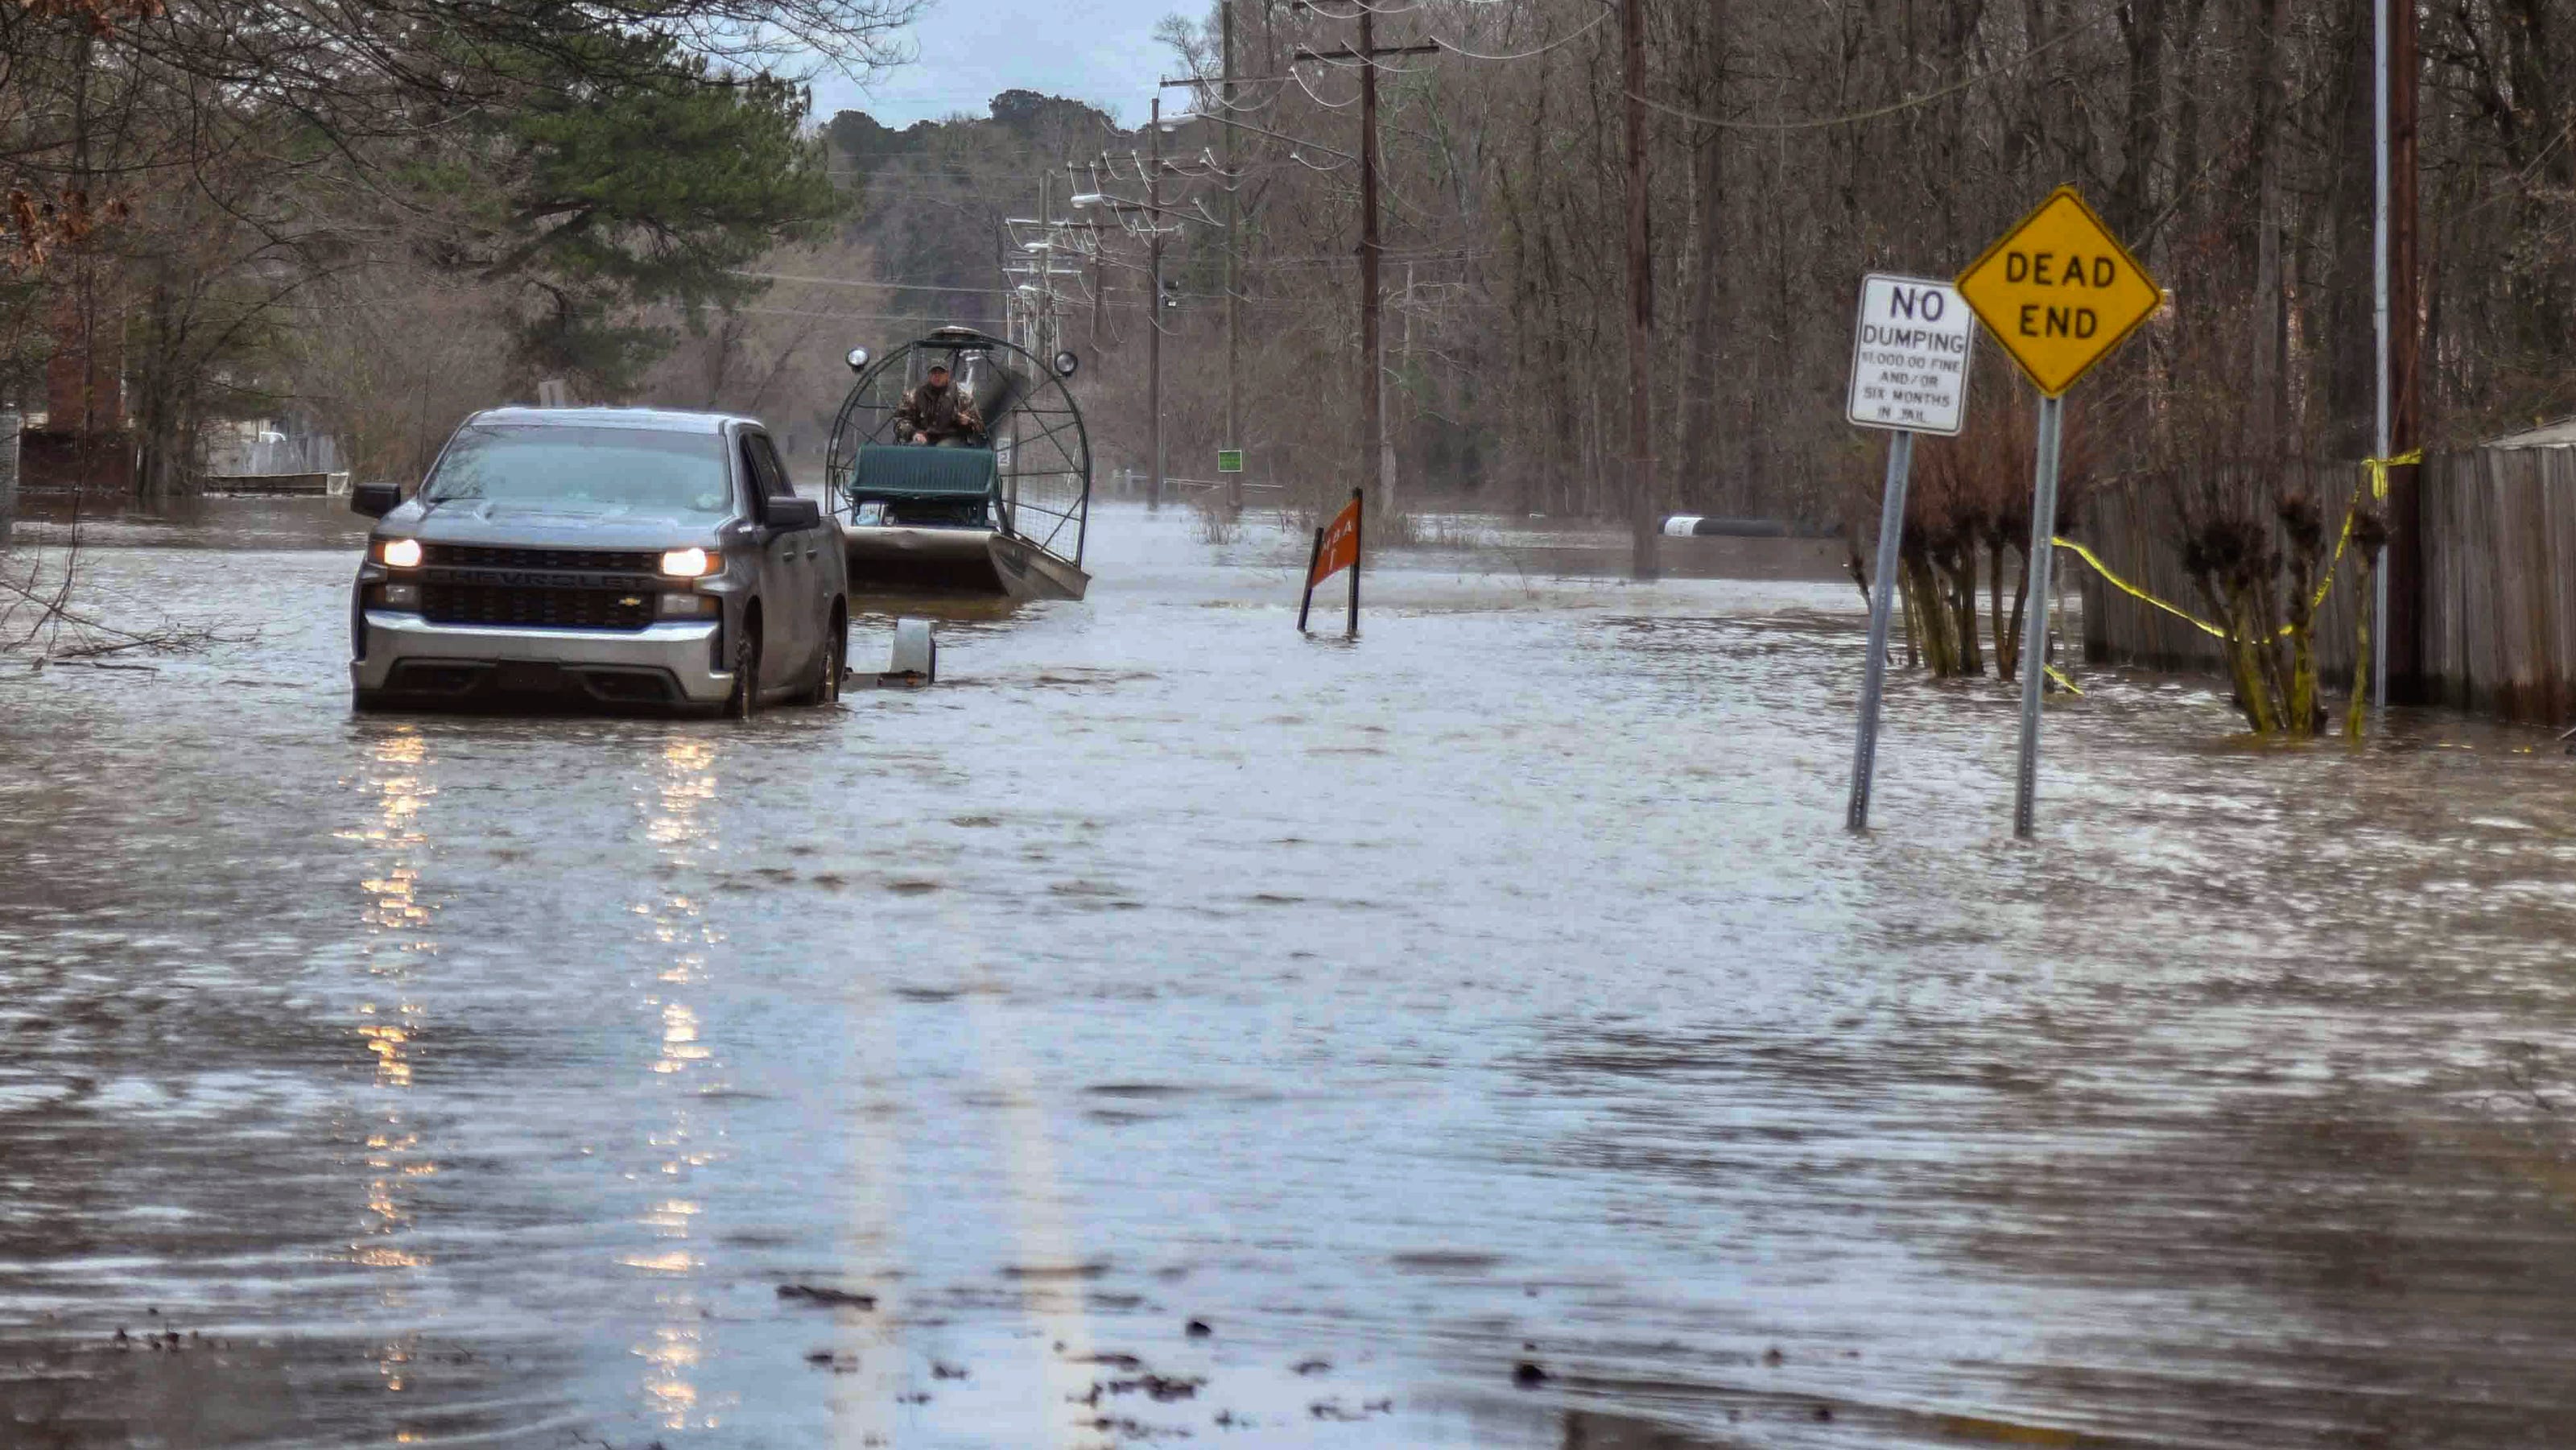 The mayor of Mississippi issues a warning to citizens to leave before the river levels rise